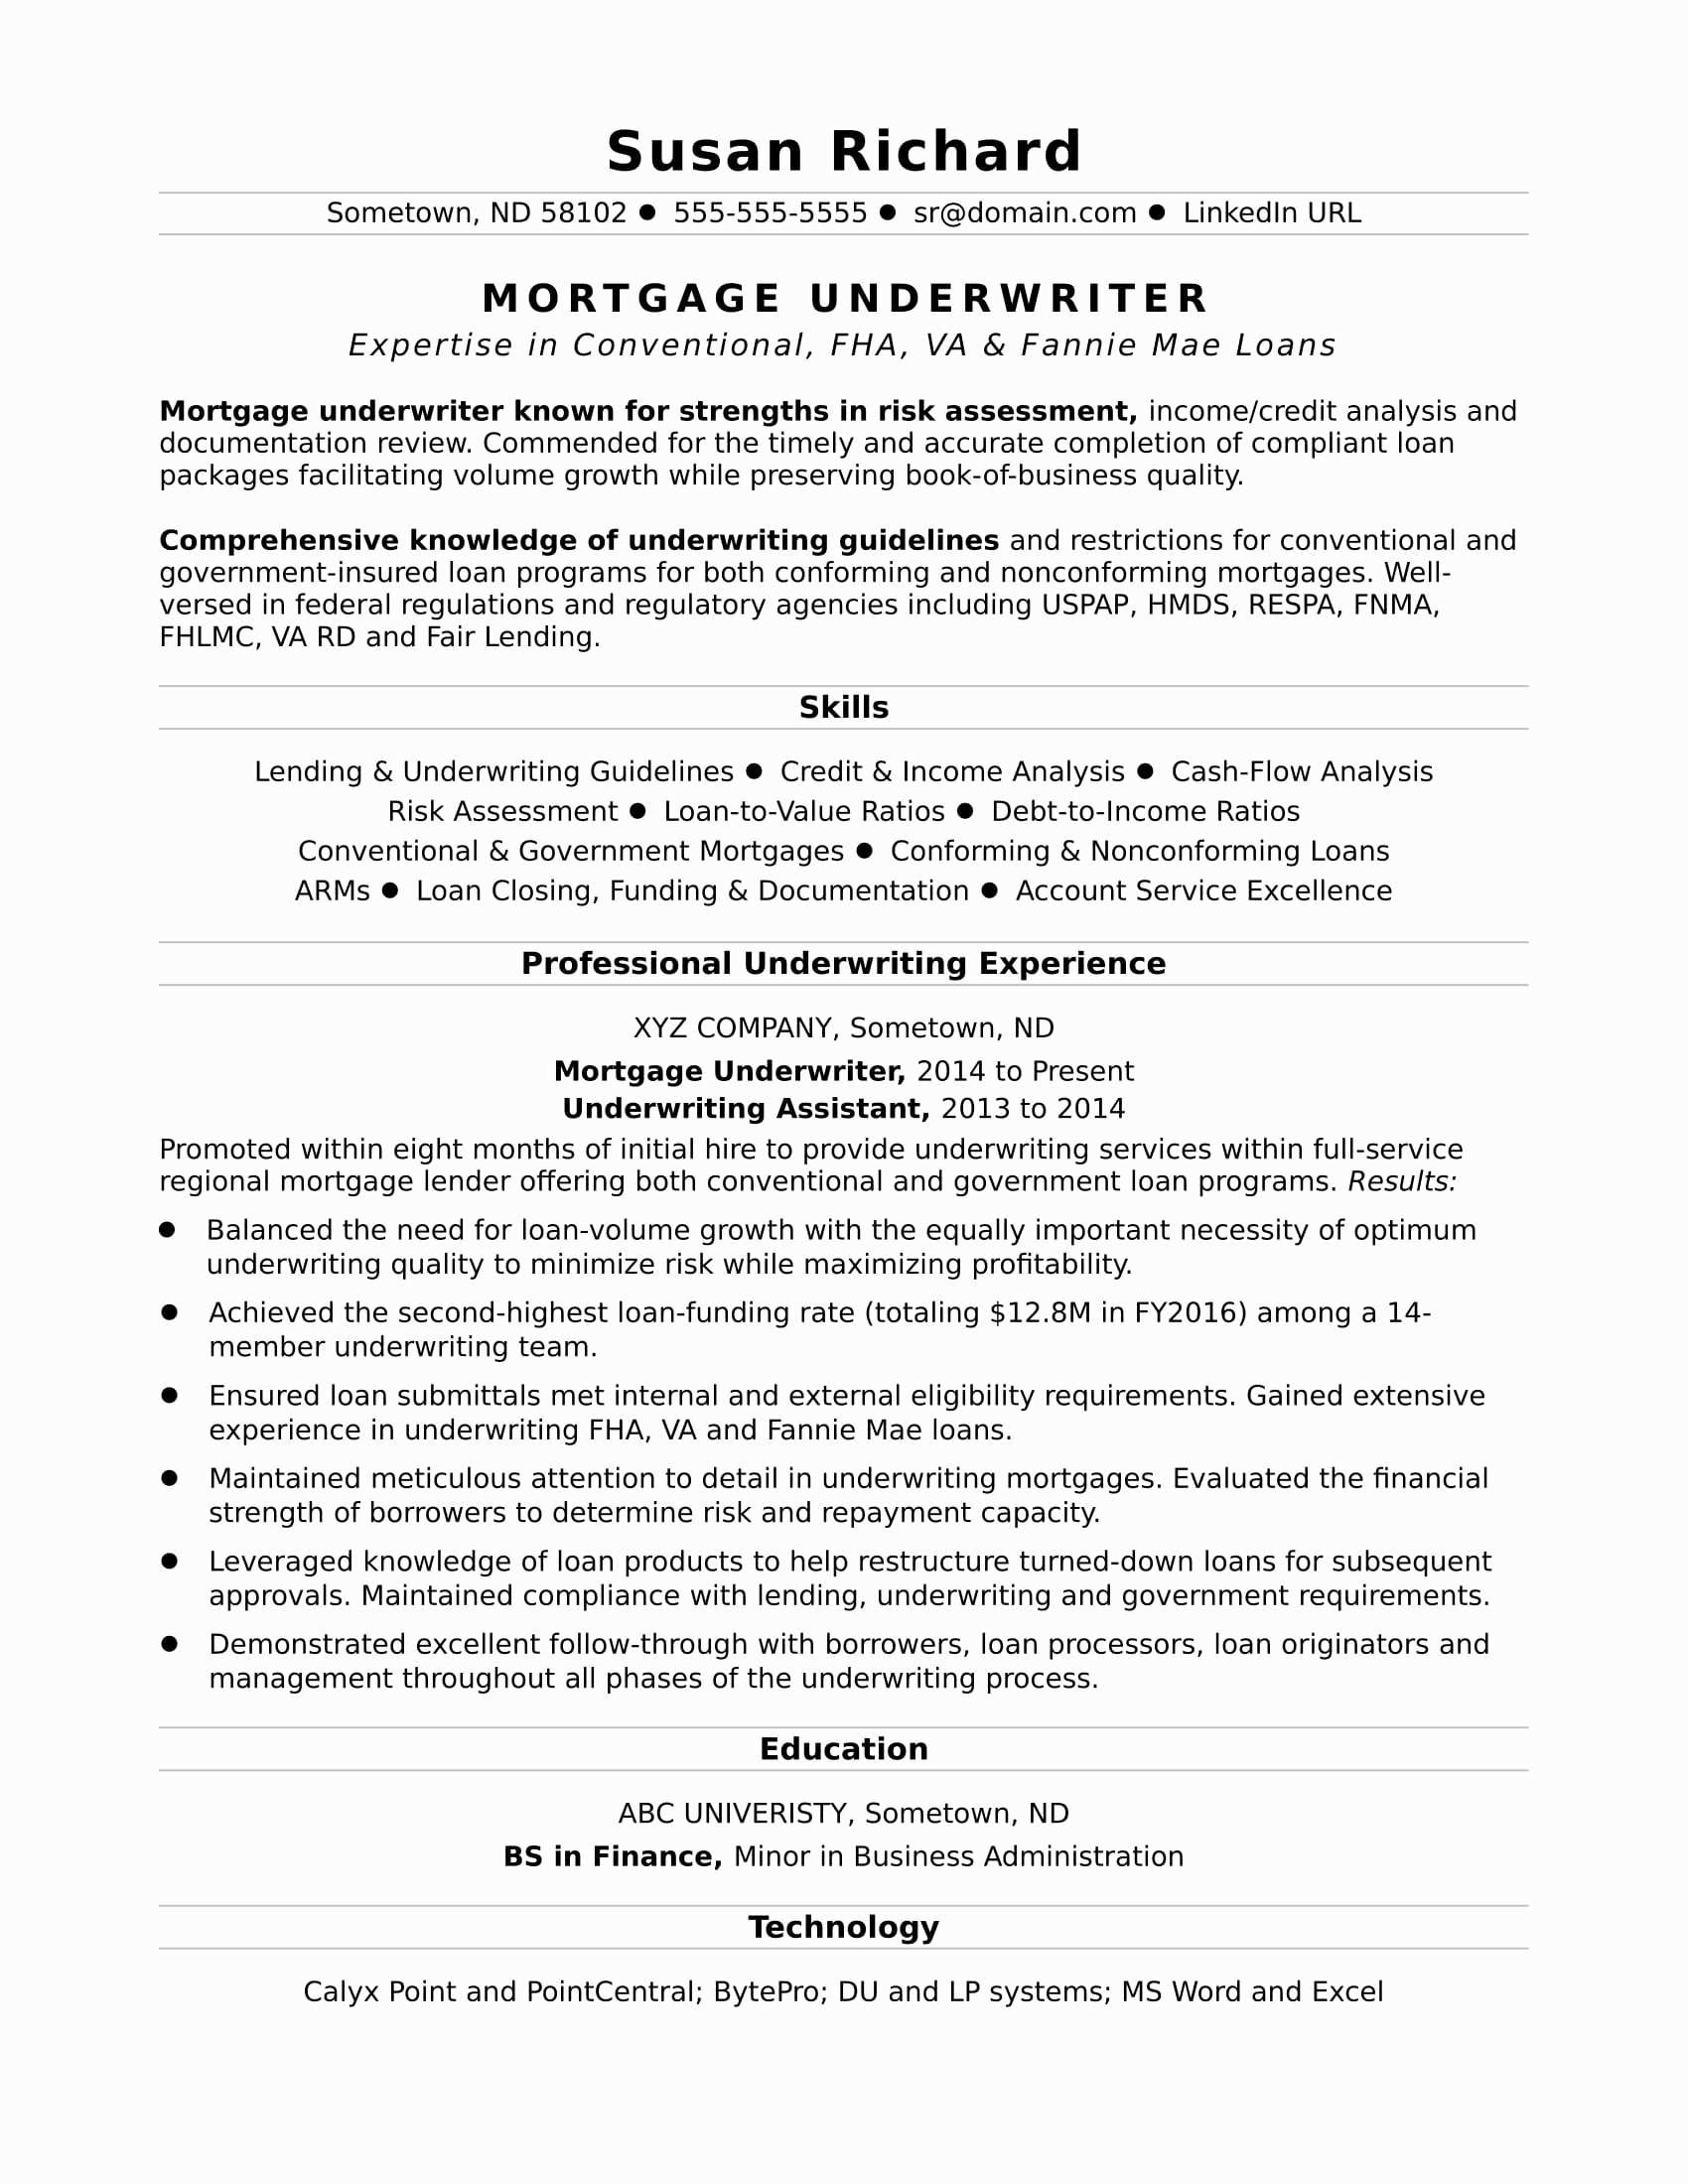 Resume and Cover Letter Template Microsoft Word - Teaching Resume Cover Letter New Sample Cover Letter Template Lovely